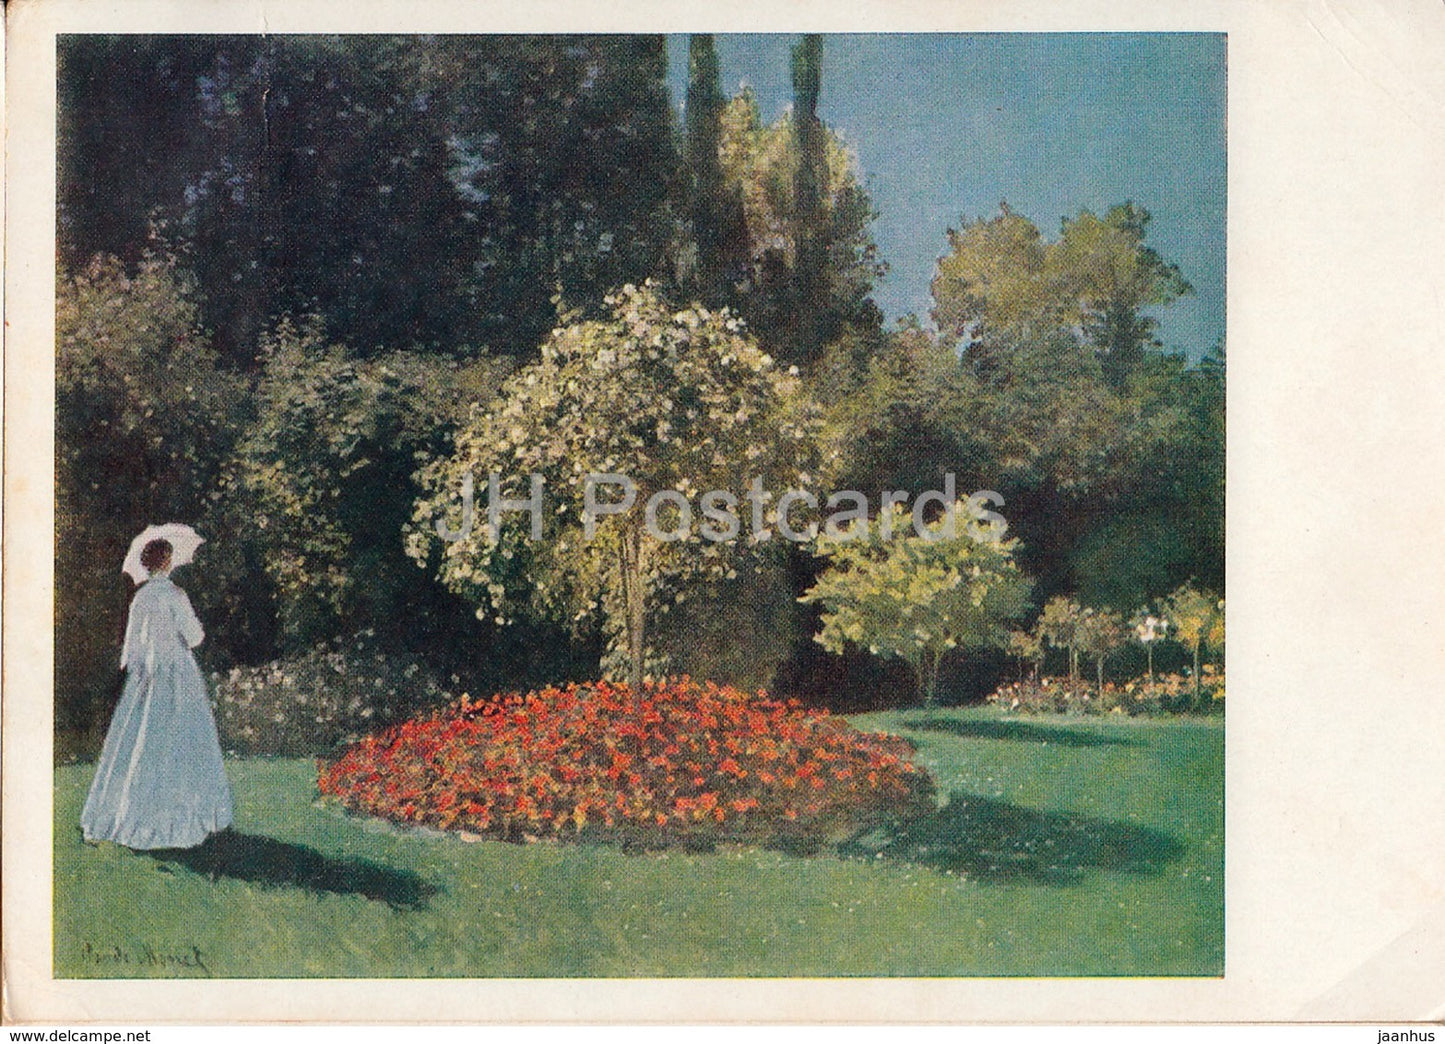 painting by Claude Monet - Woman in the Garden - French art - 1962 - Russia USSR - unused - JH Postcards